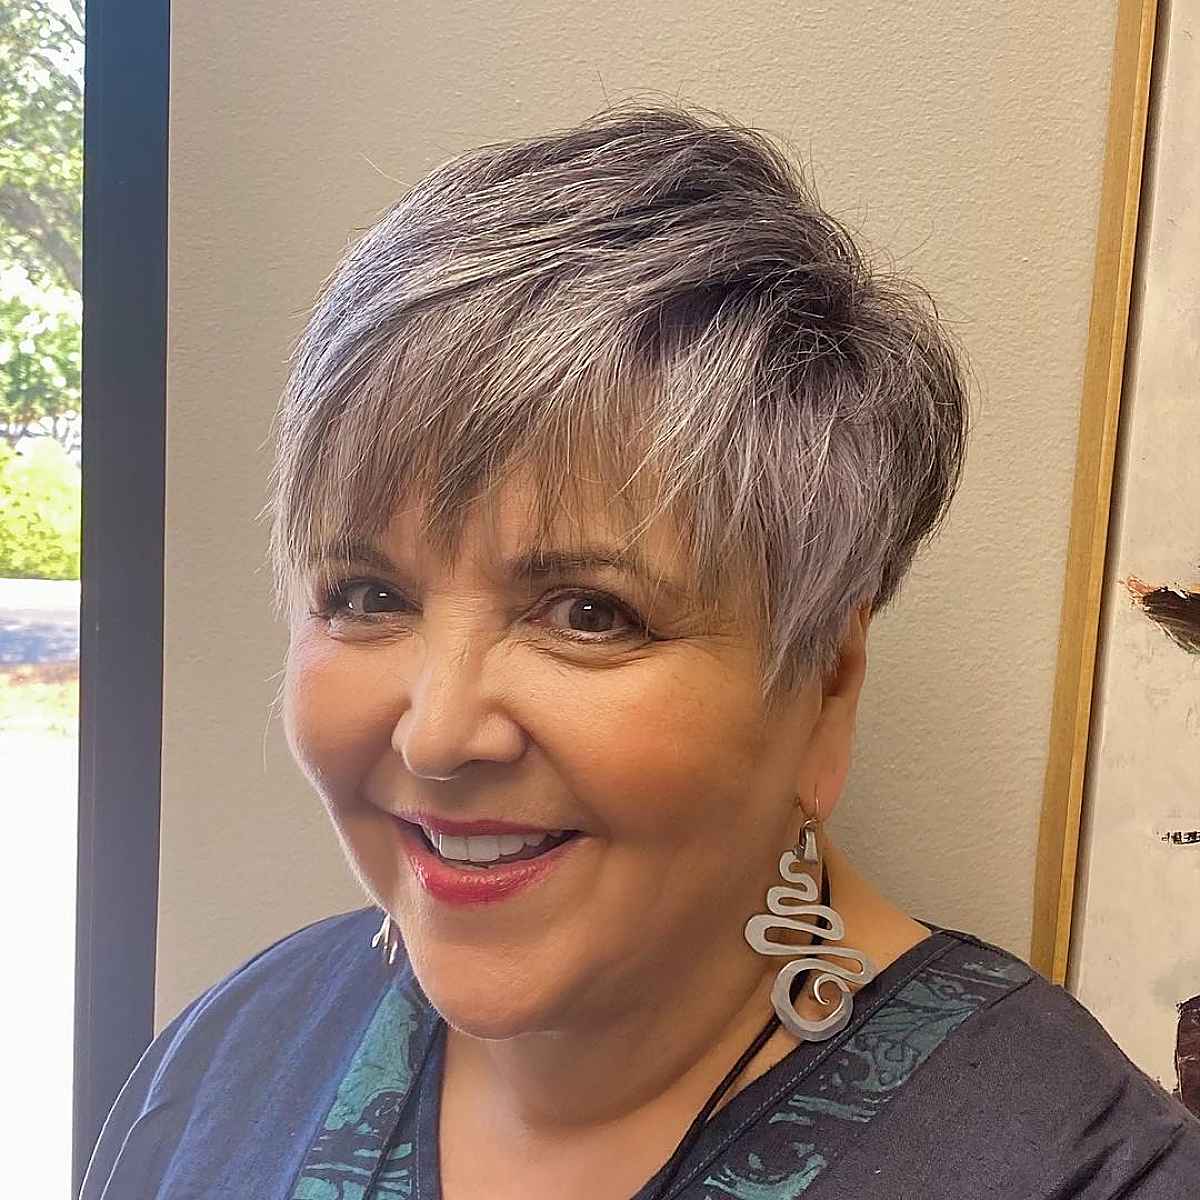 Salt and Pepper Pixie Hairstyle for Women Over 60